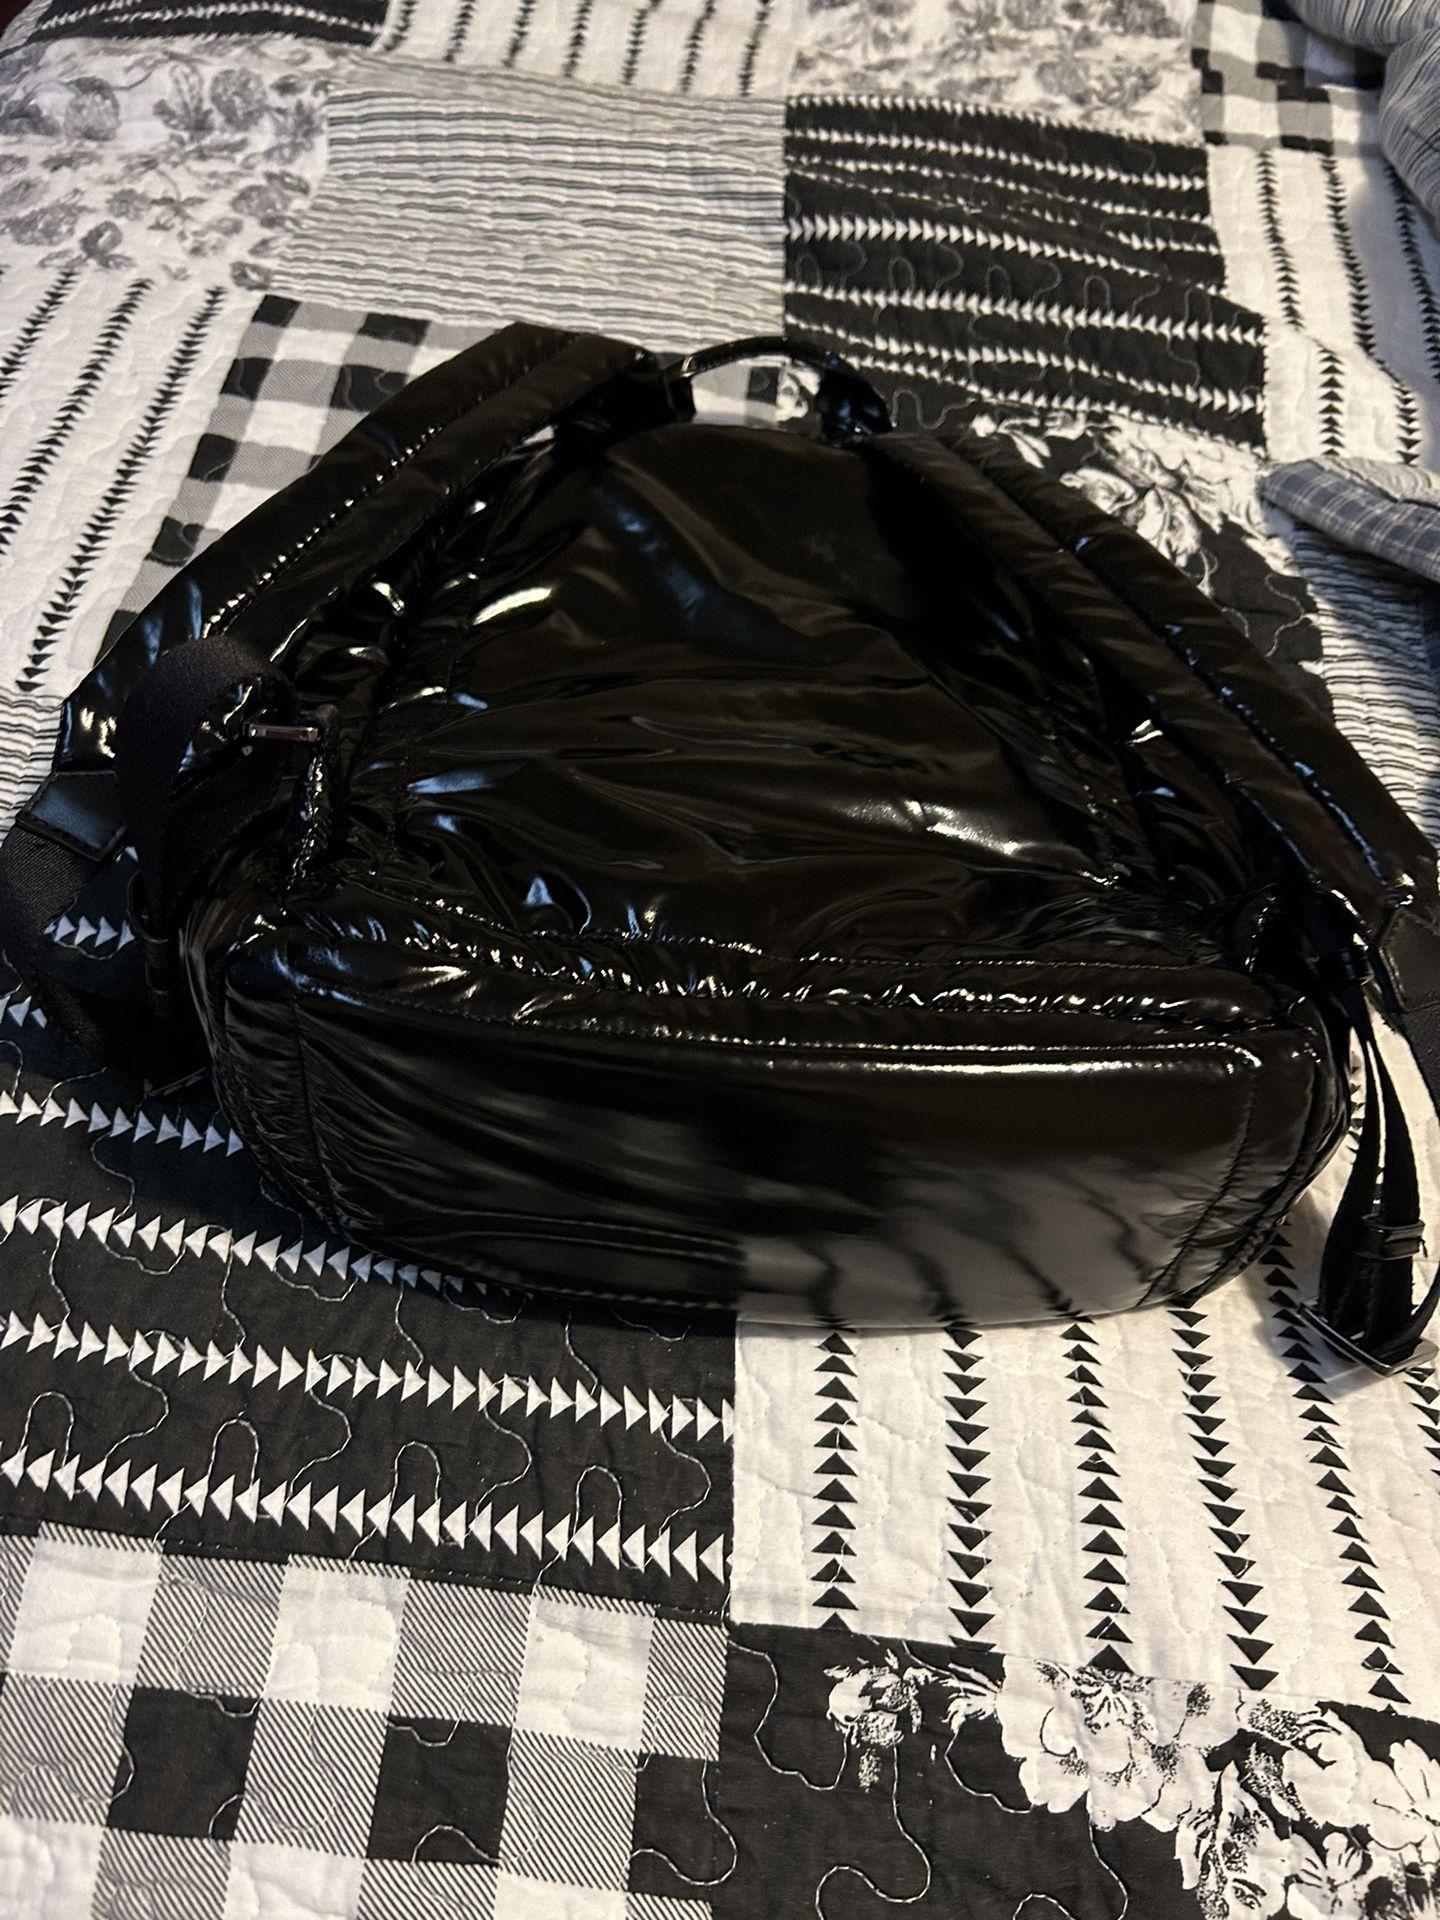 MICHAEL KORS GLOSSY BACKPACK for Sale in Ford, KY - OfferUp